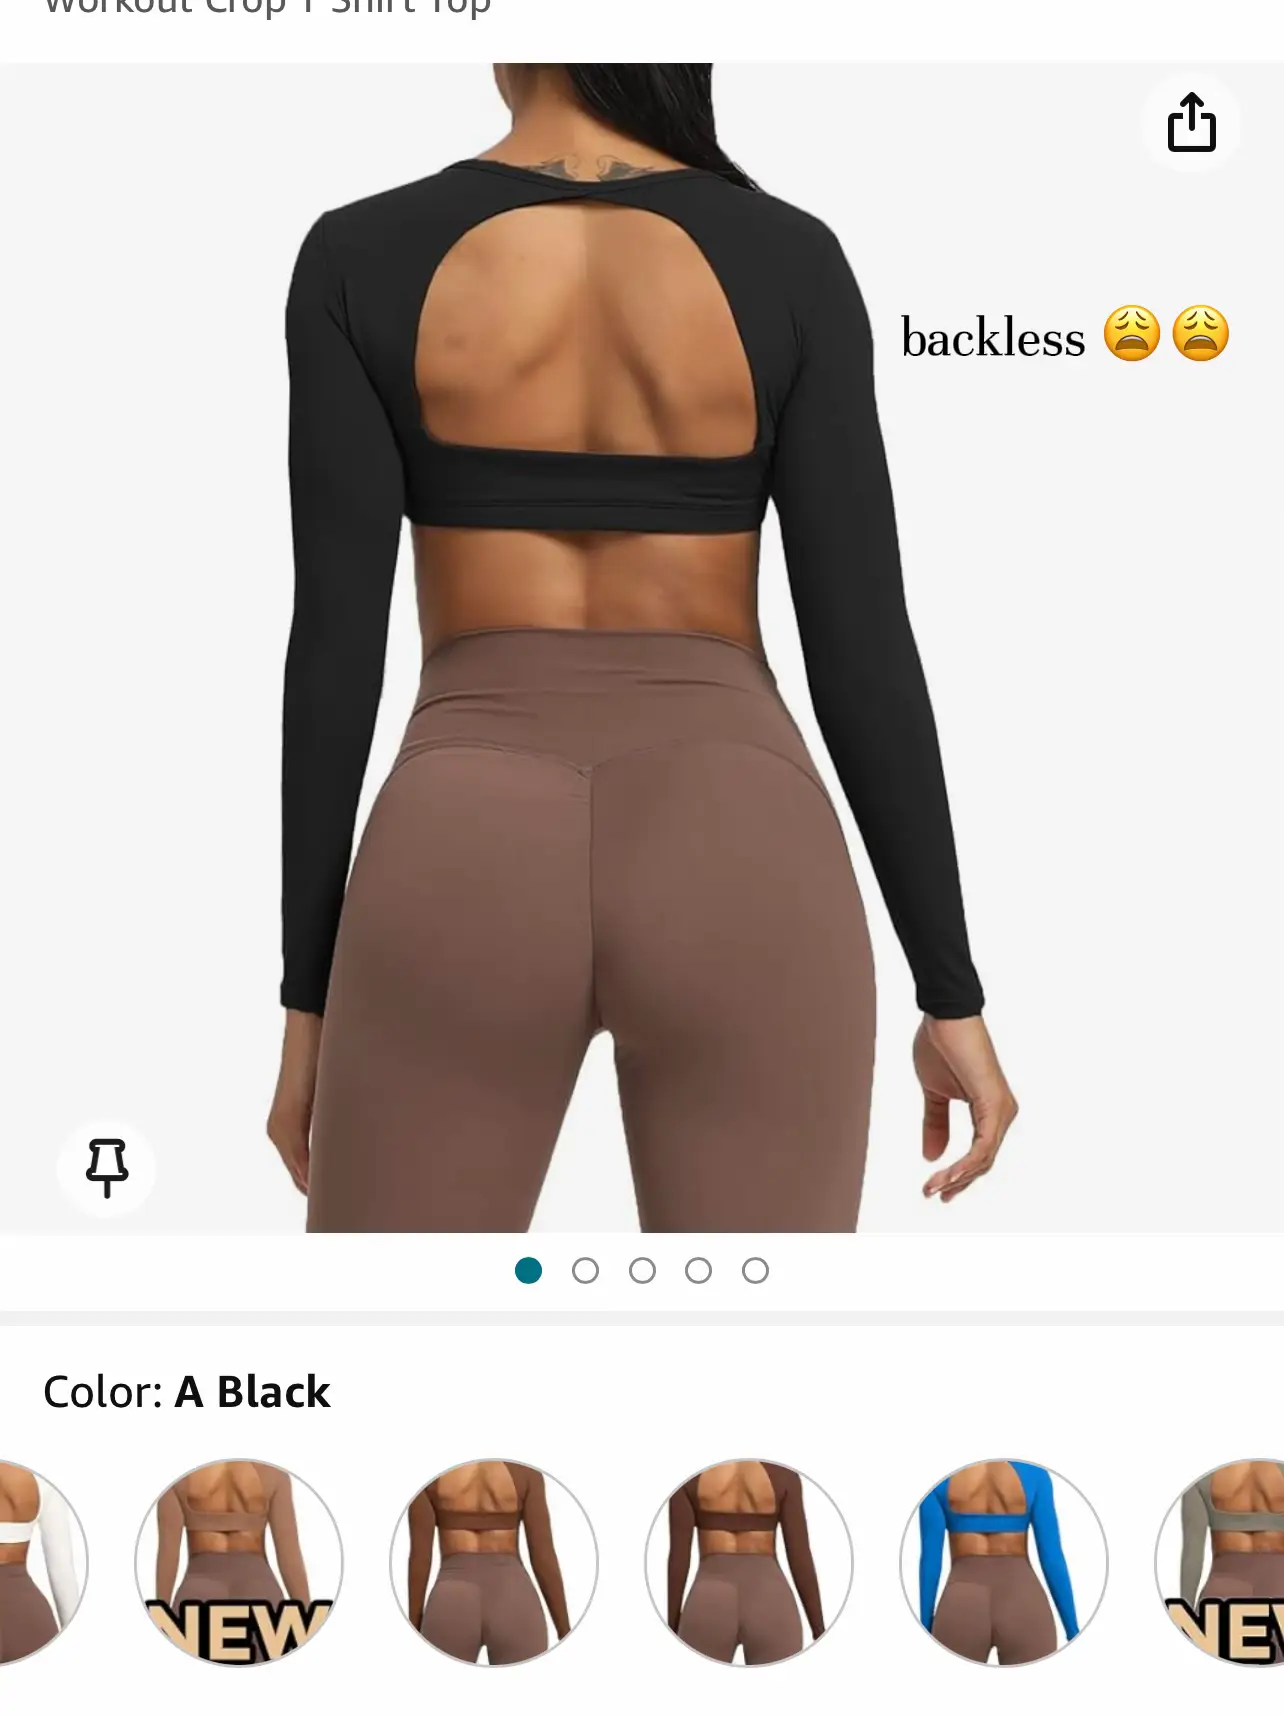 backless gym tops for women - Lemon8 Search